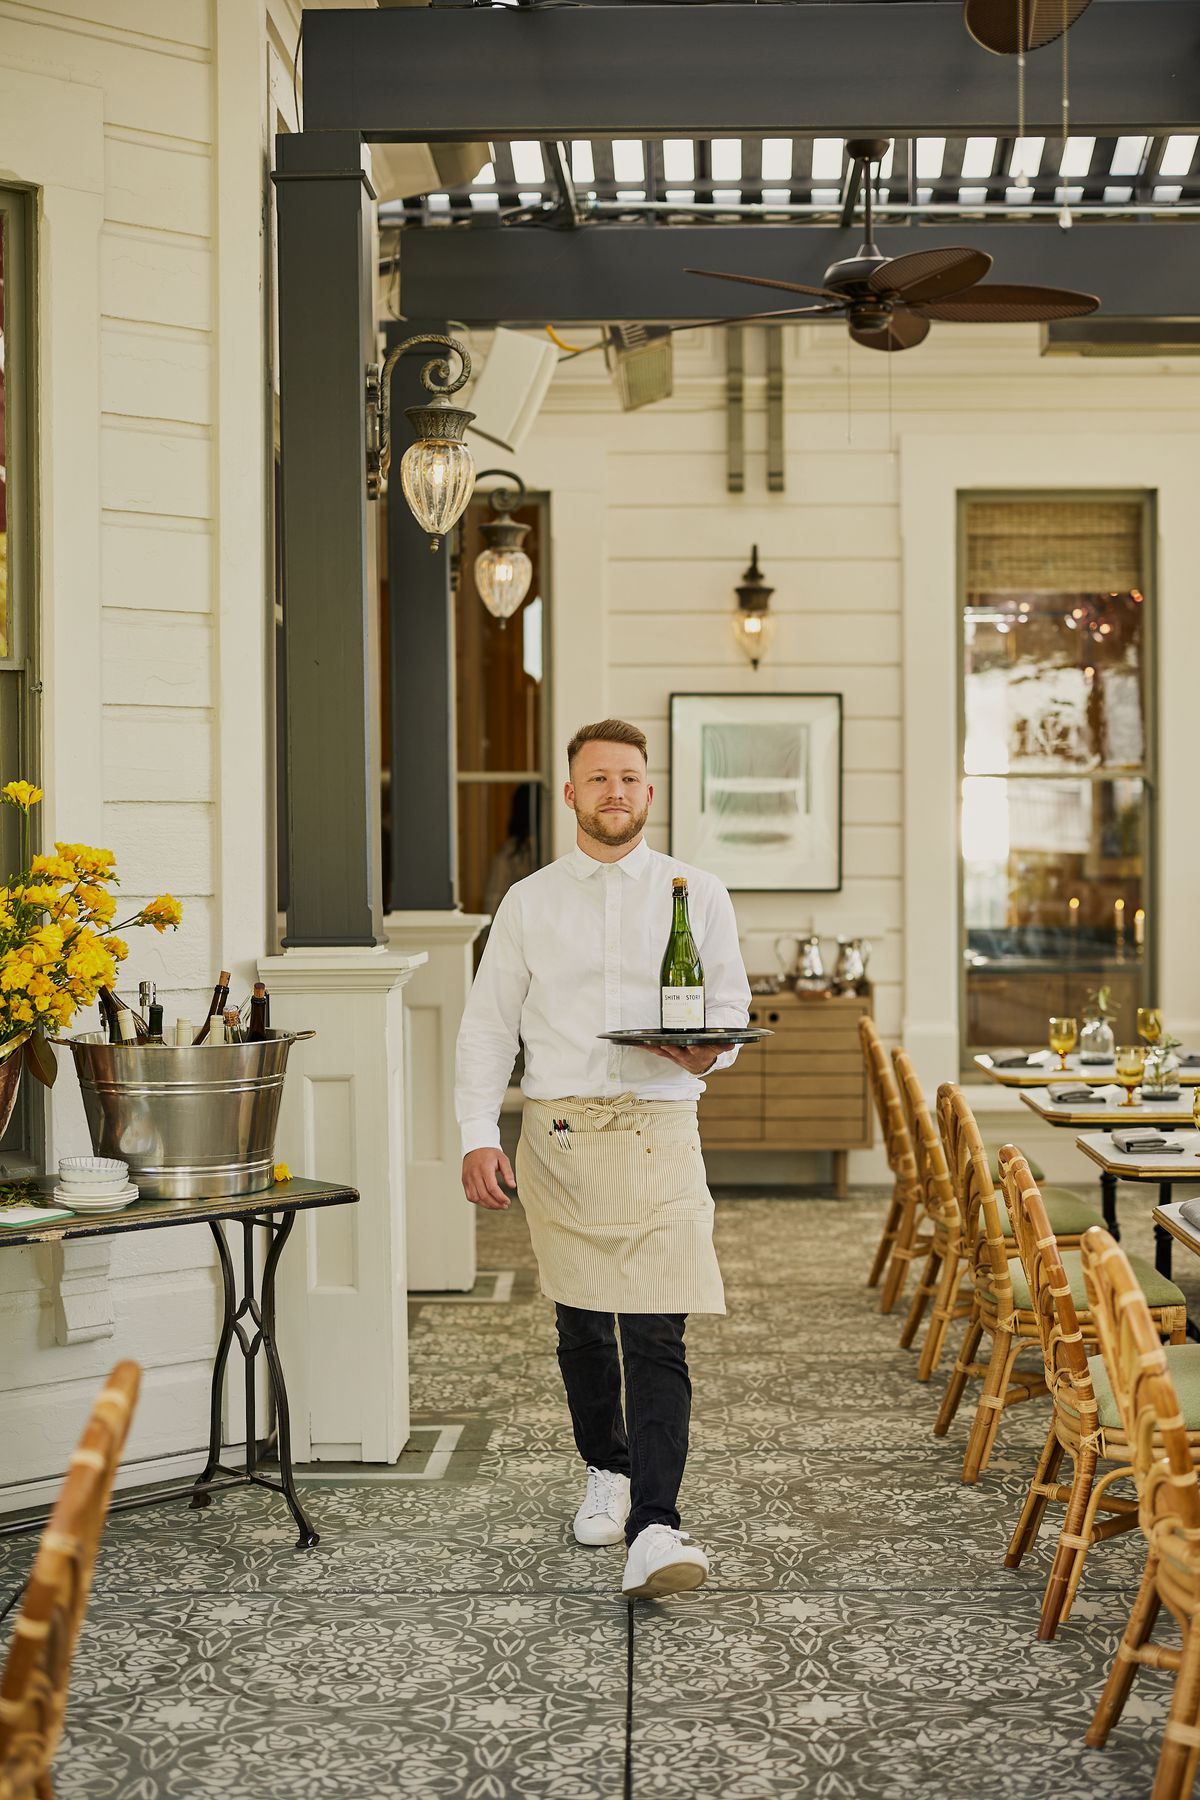 A server holding a tray with a cocktail walks toward the camera.